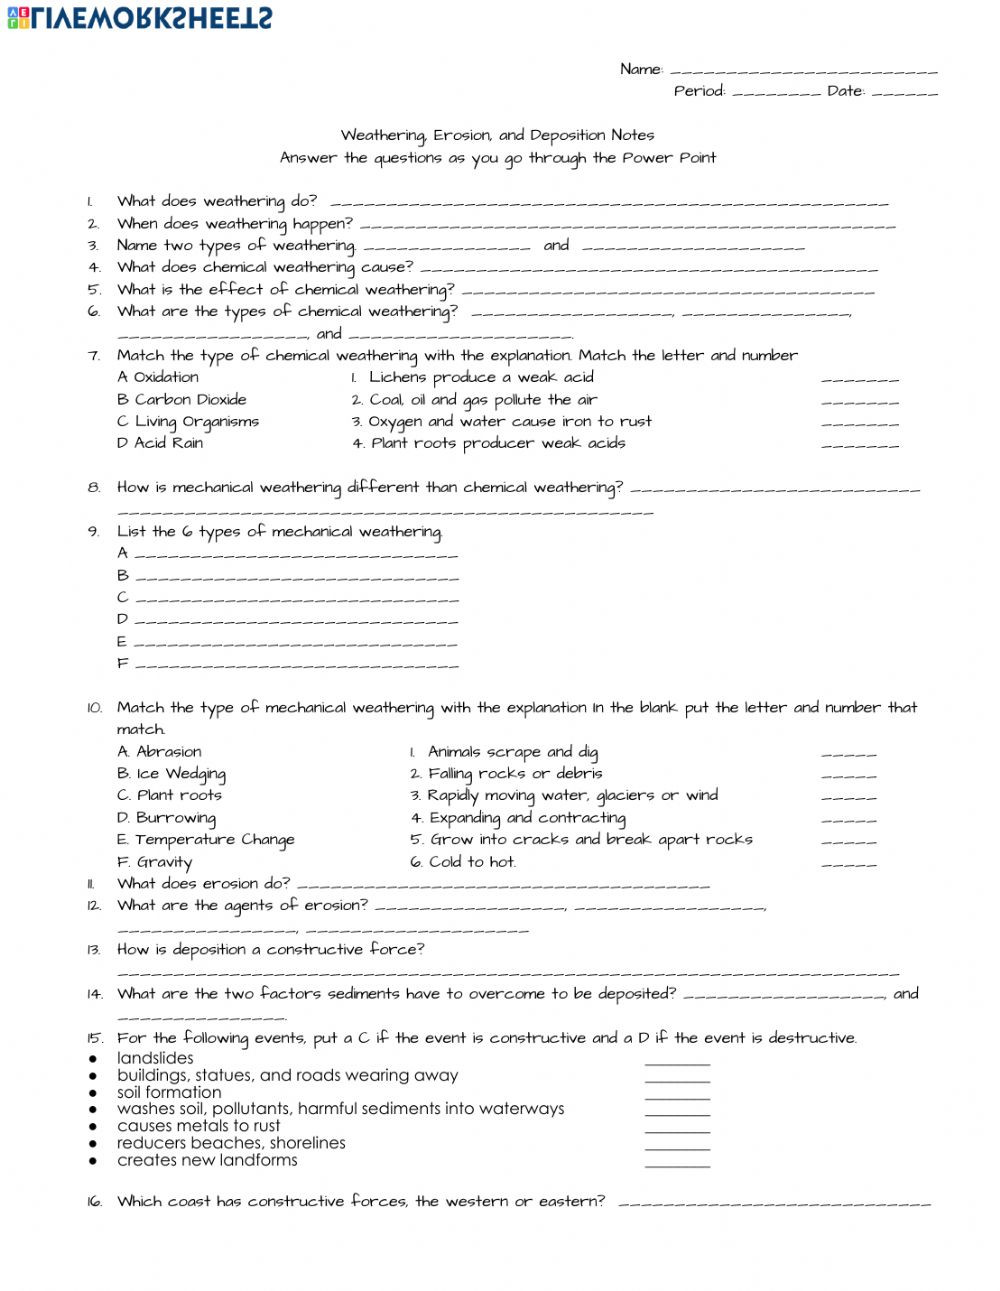 Erosion and Deposition Worksheet Weathering Erosion and Deposition Note Guide Interactive